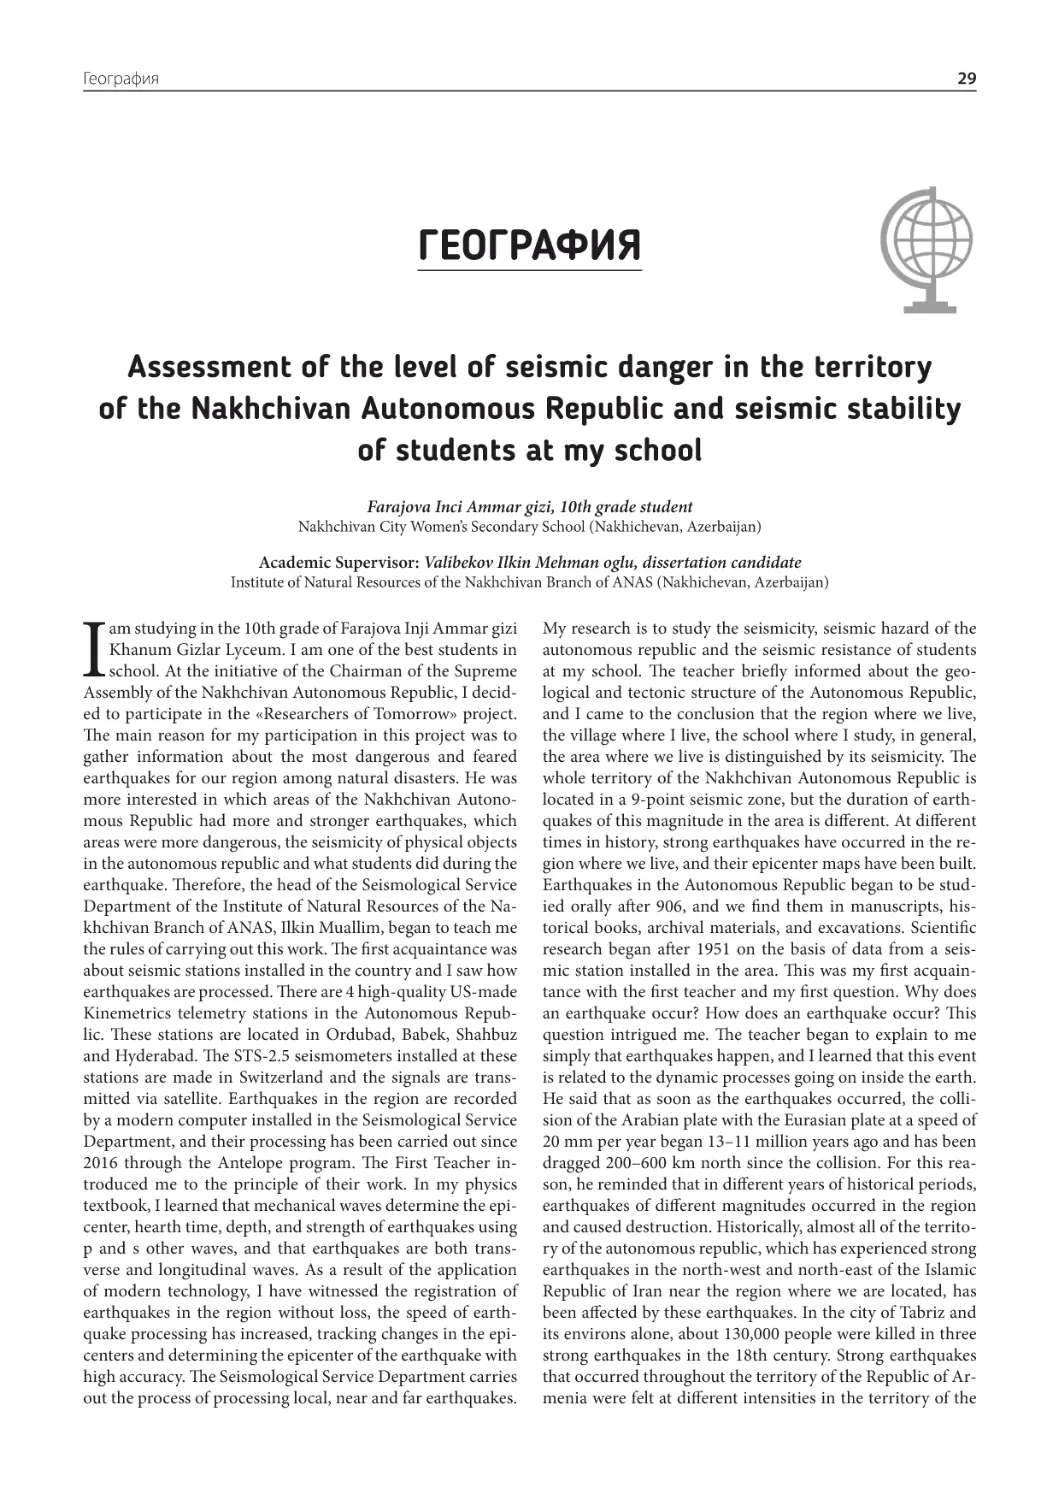 География
Assessment of the level of seismic danger in the territory of the Nakhchivan Autonomous Republic and seismic stability of students at my school